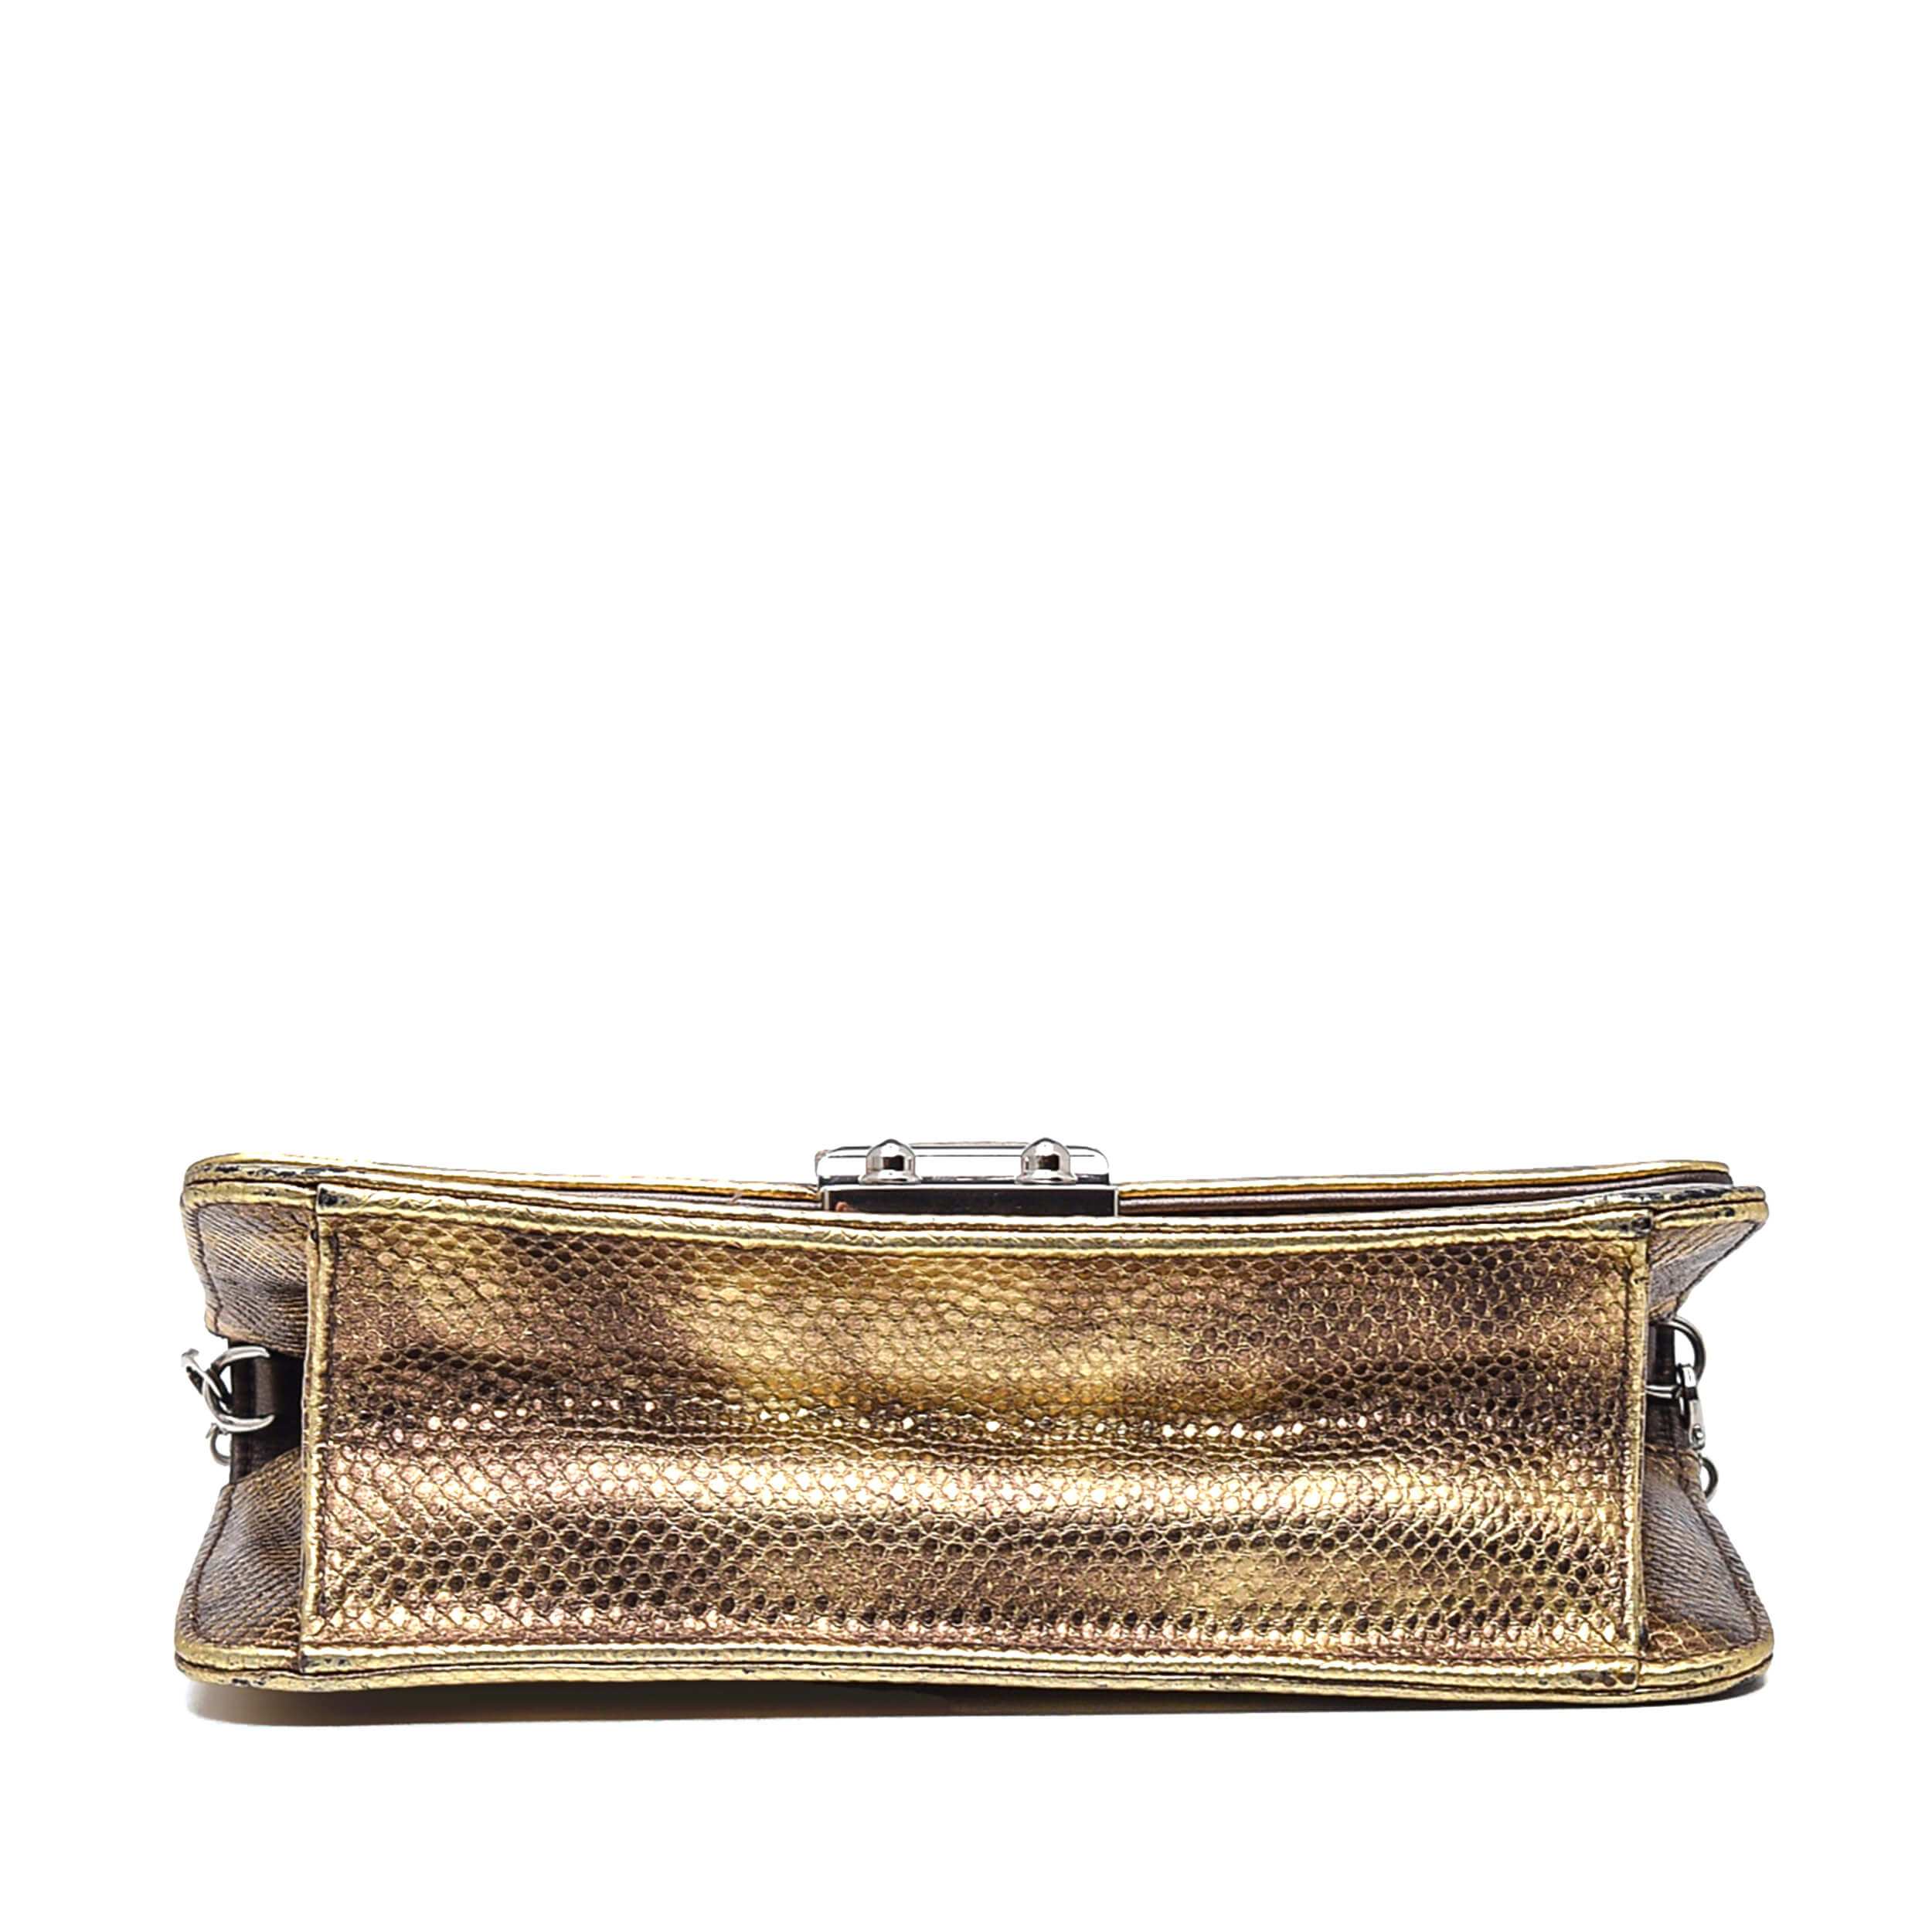 Christian Dior - Gold Exotic Leather Wallet on Chain Bag